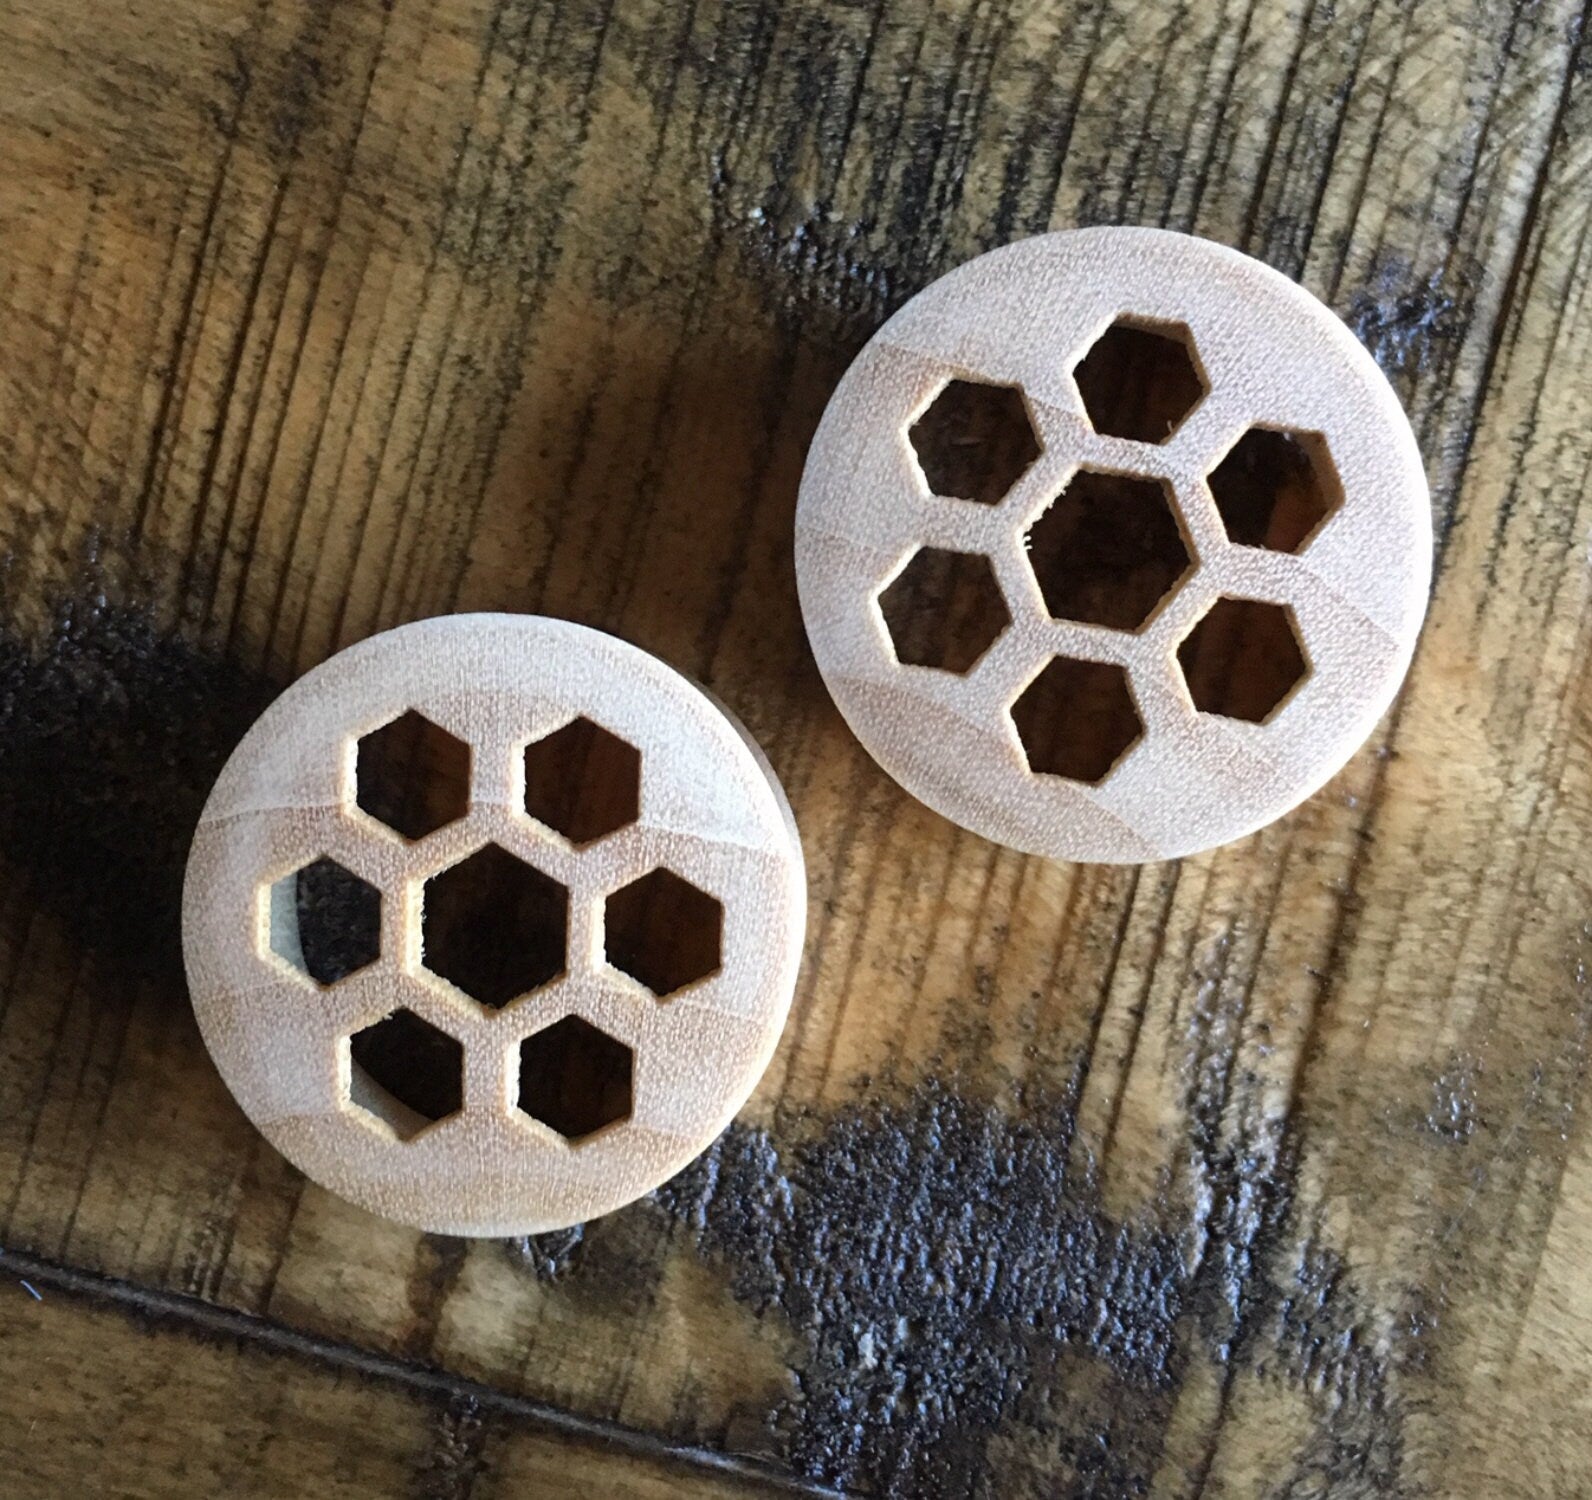 PAIR of Organic Honeycomb Cut Out Blonde Crocodile Wood Saddle Plugs - Gauges 00g (10mm) up to 1" (25mm) available!